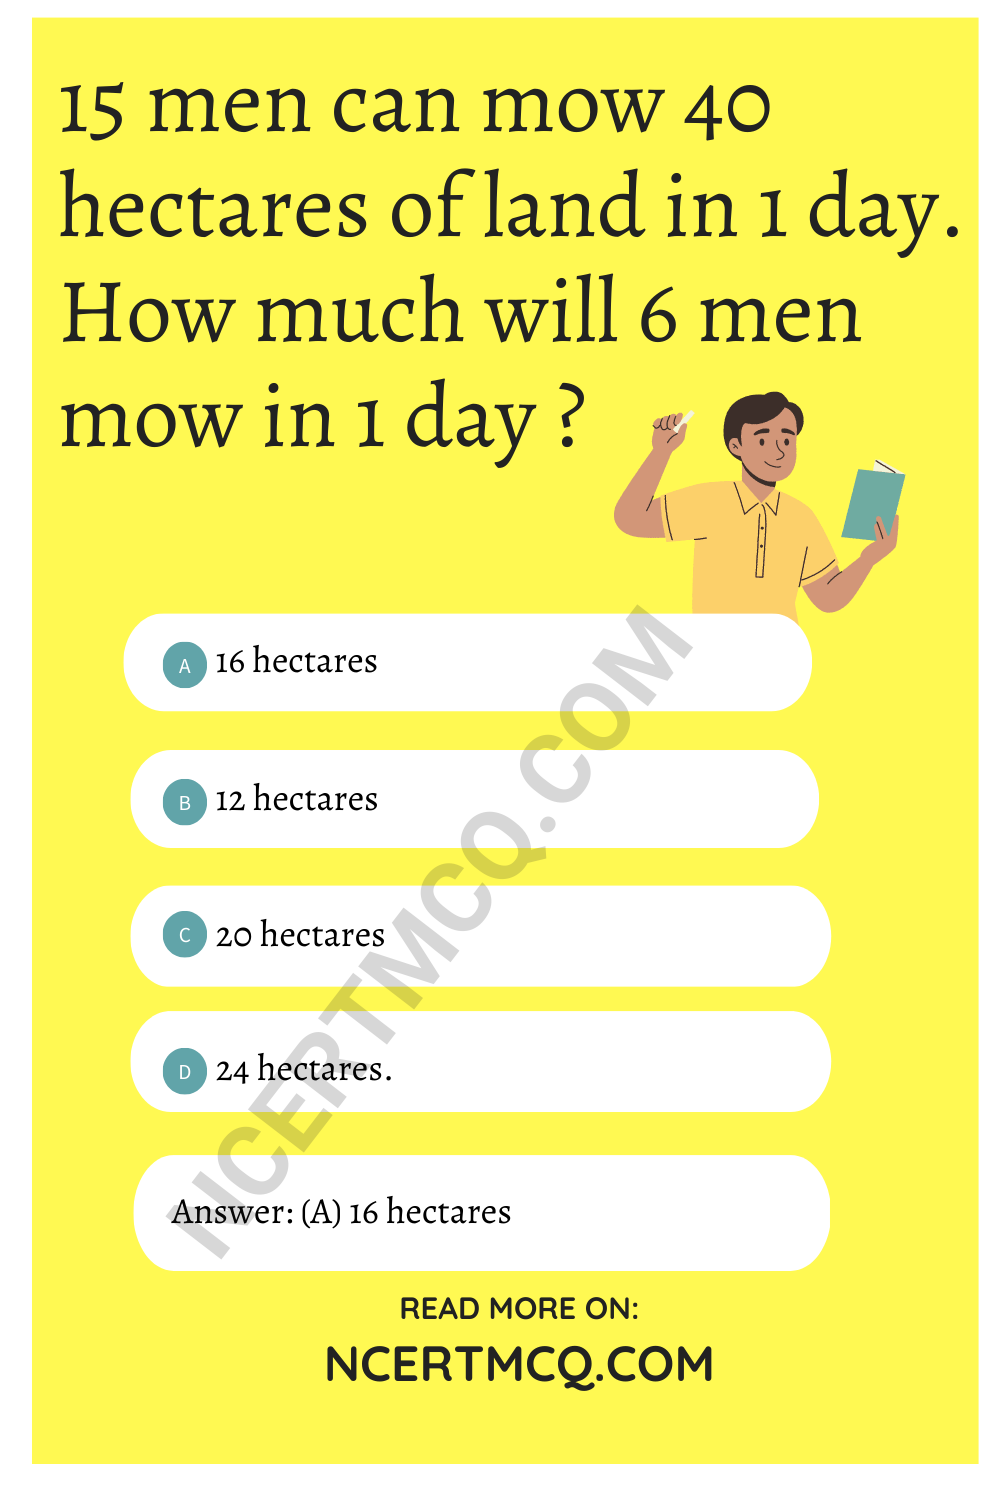 15 men can mow 40 hectares of land in 1 day. How much will 6 men mow in 1 day ?